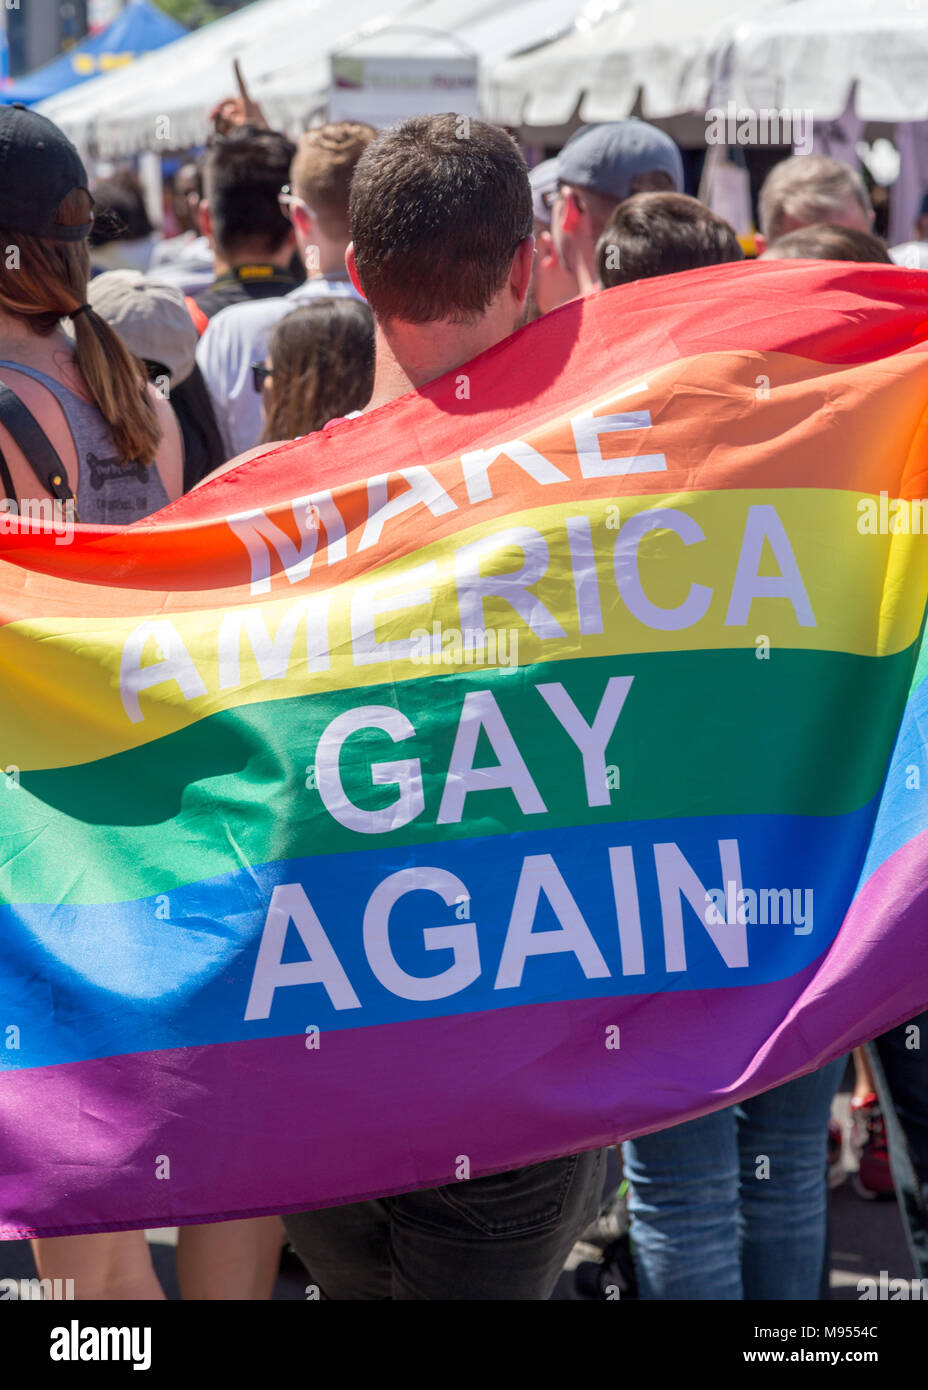 Washington DC - June 11, 2017. Capital Pride Parade, in Washington DC. Person holding a rainbow flag where one can read 'Make America gay again' Stock Photo